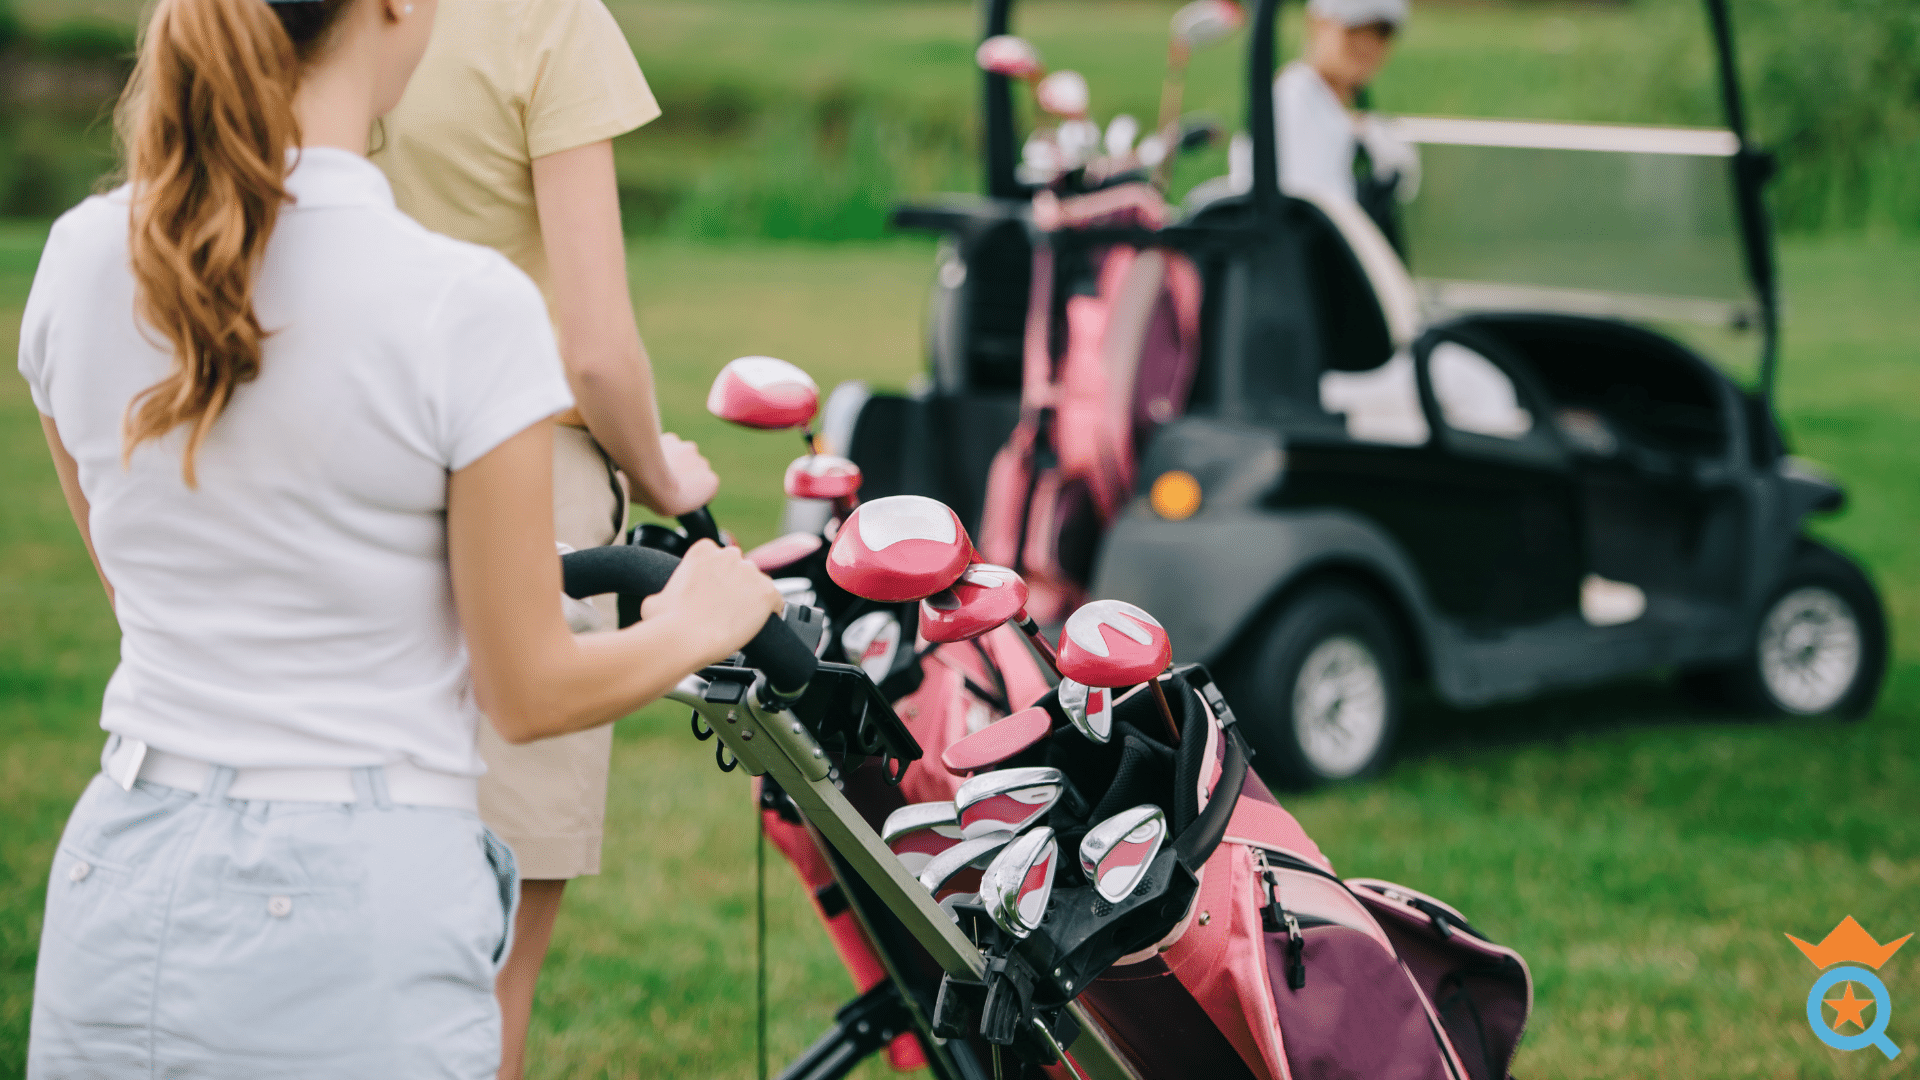 How to Choose Which Golf Club Is Right for You